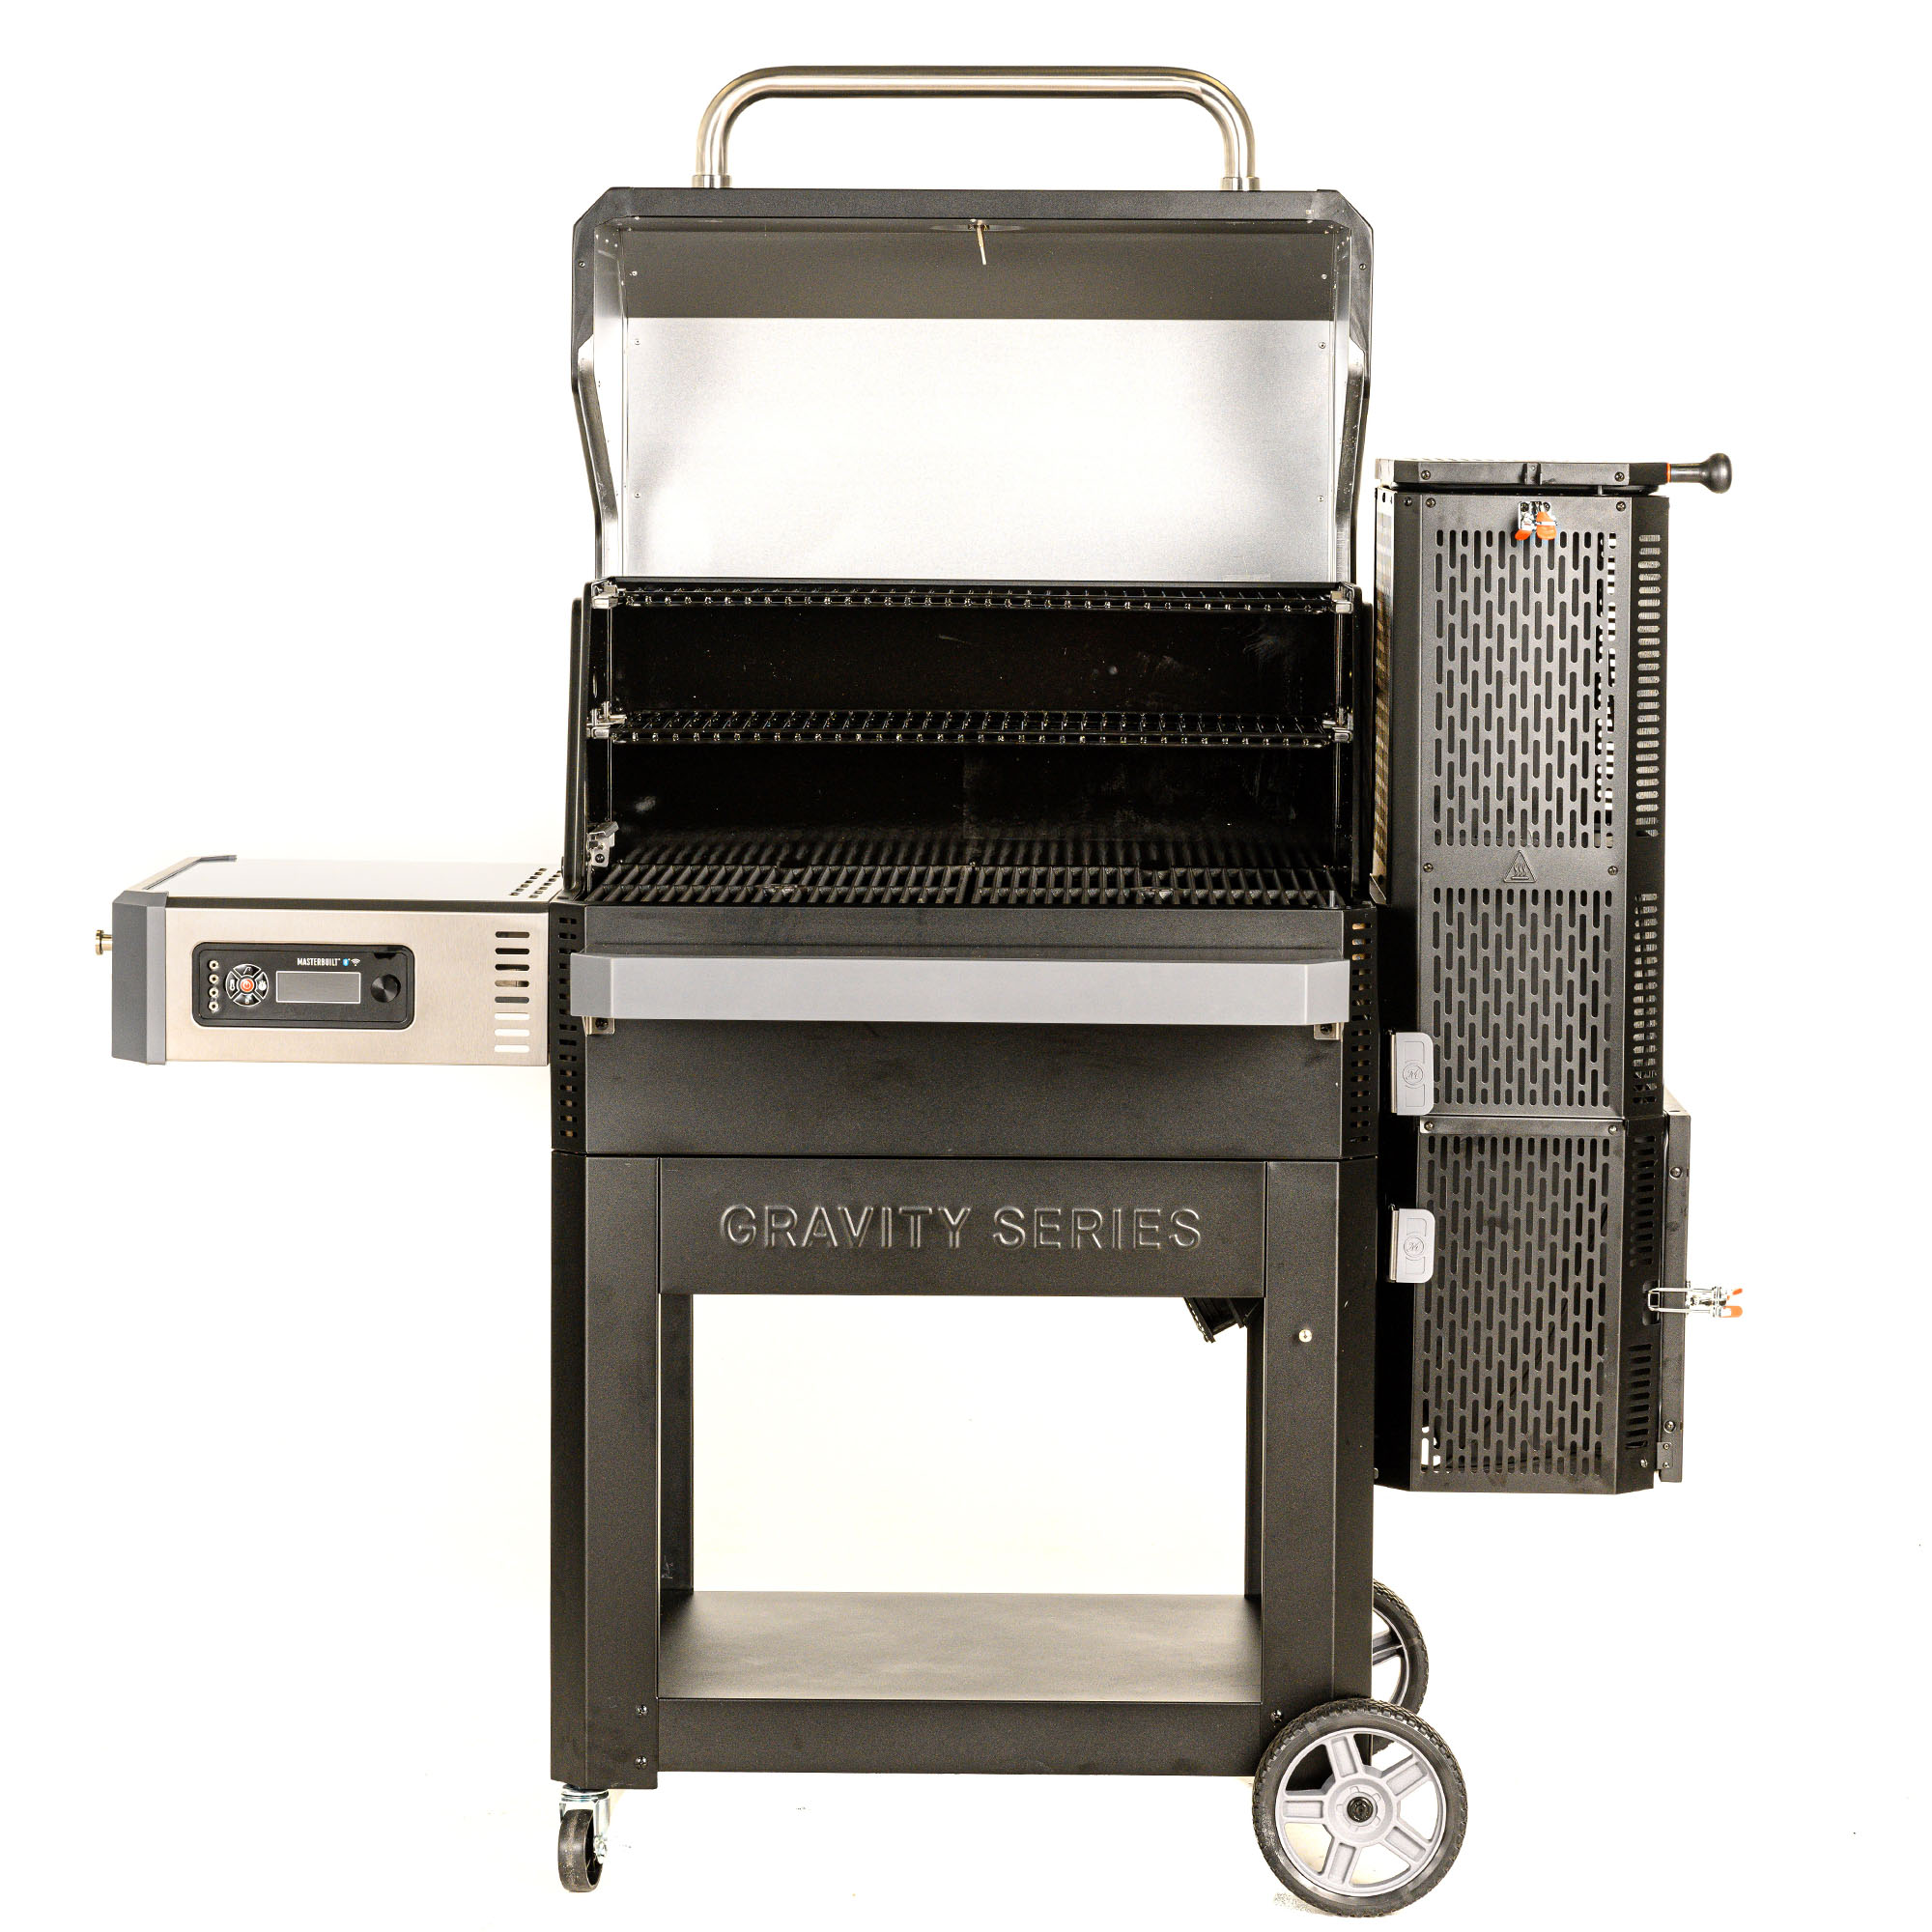 Gravity Series 1050 Digital Charcoal Grill + Smoker - image 3 of 11